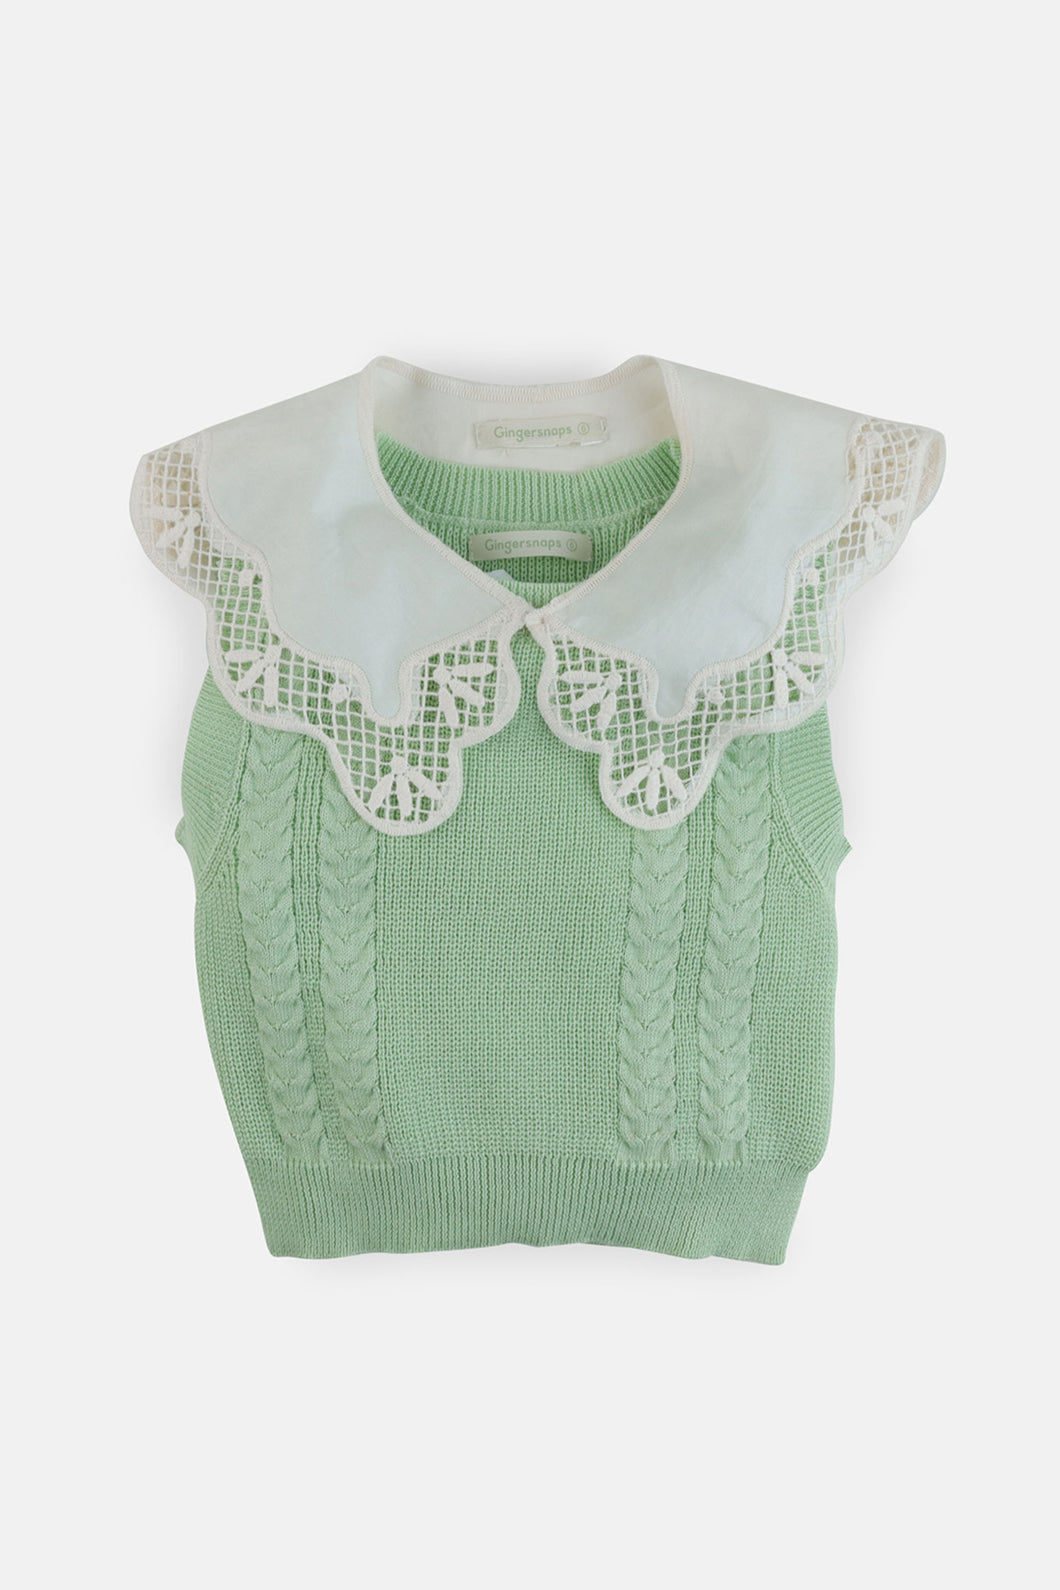 Gingersnaps Knit Top with Detachable Collar